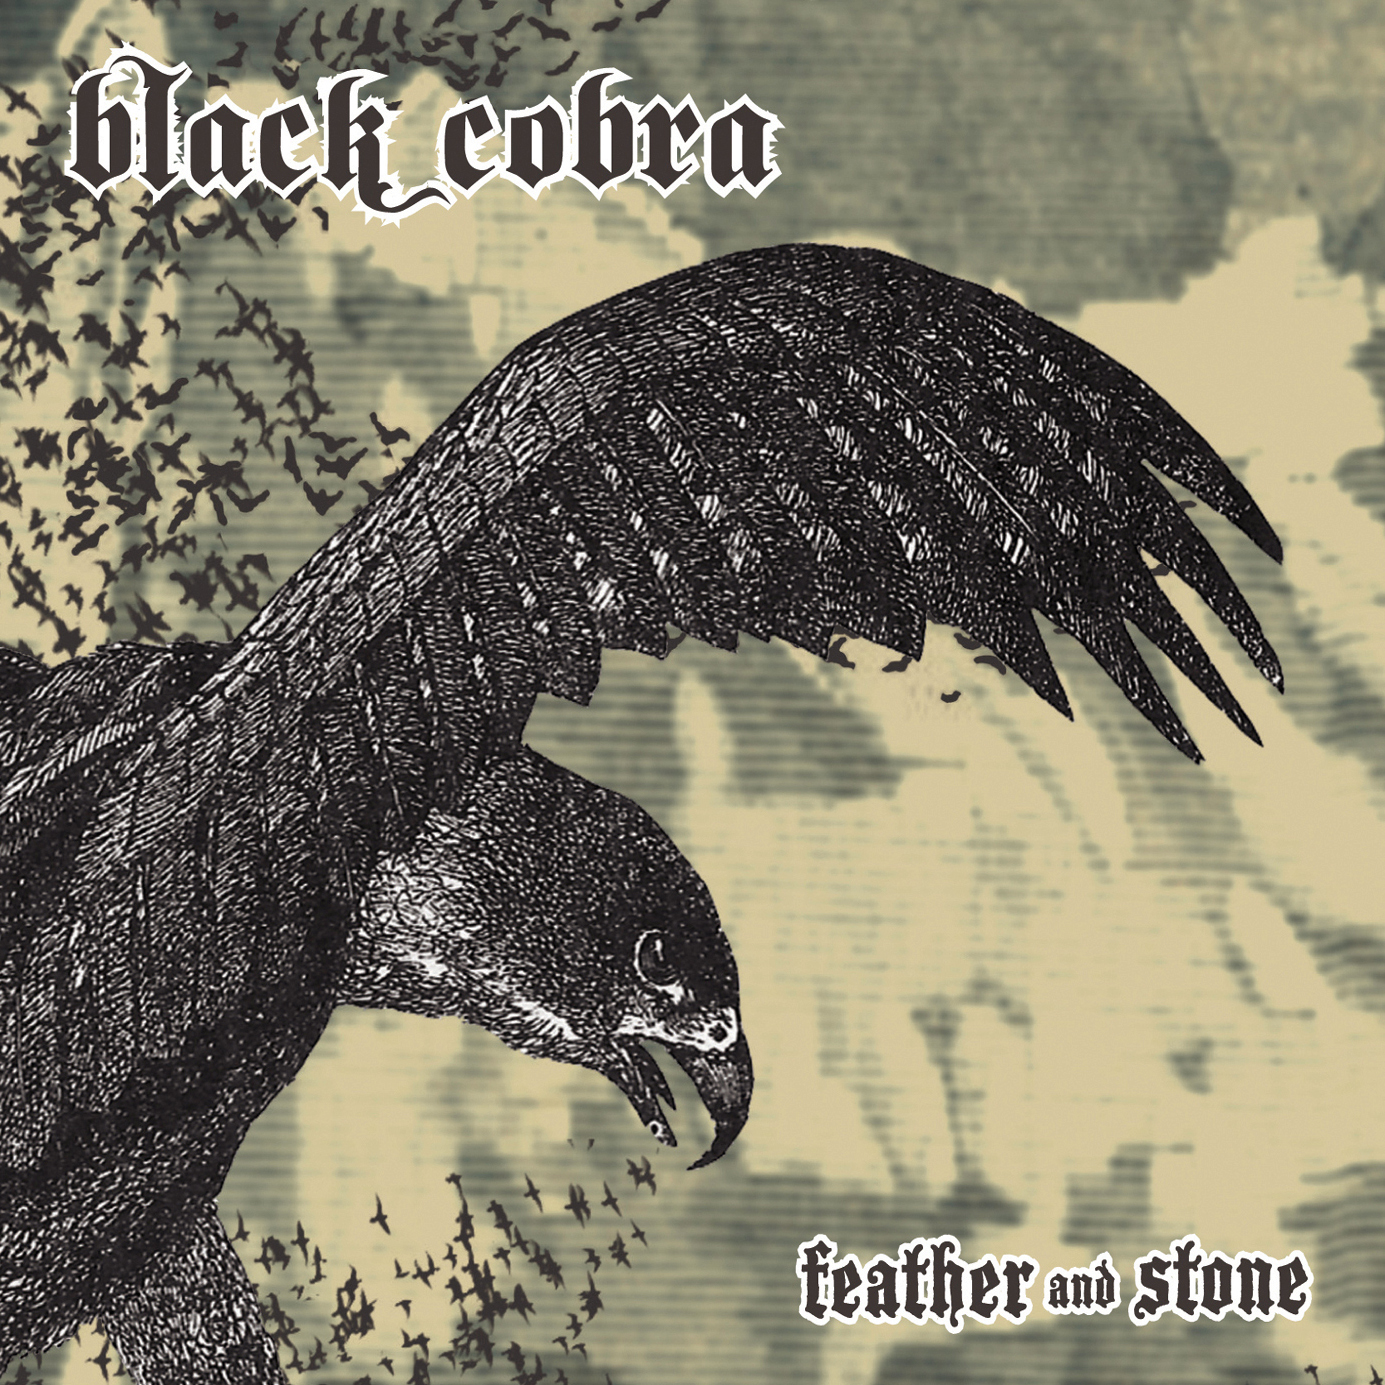 BLACK COBRA - Feather And Stone cover 